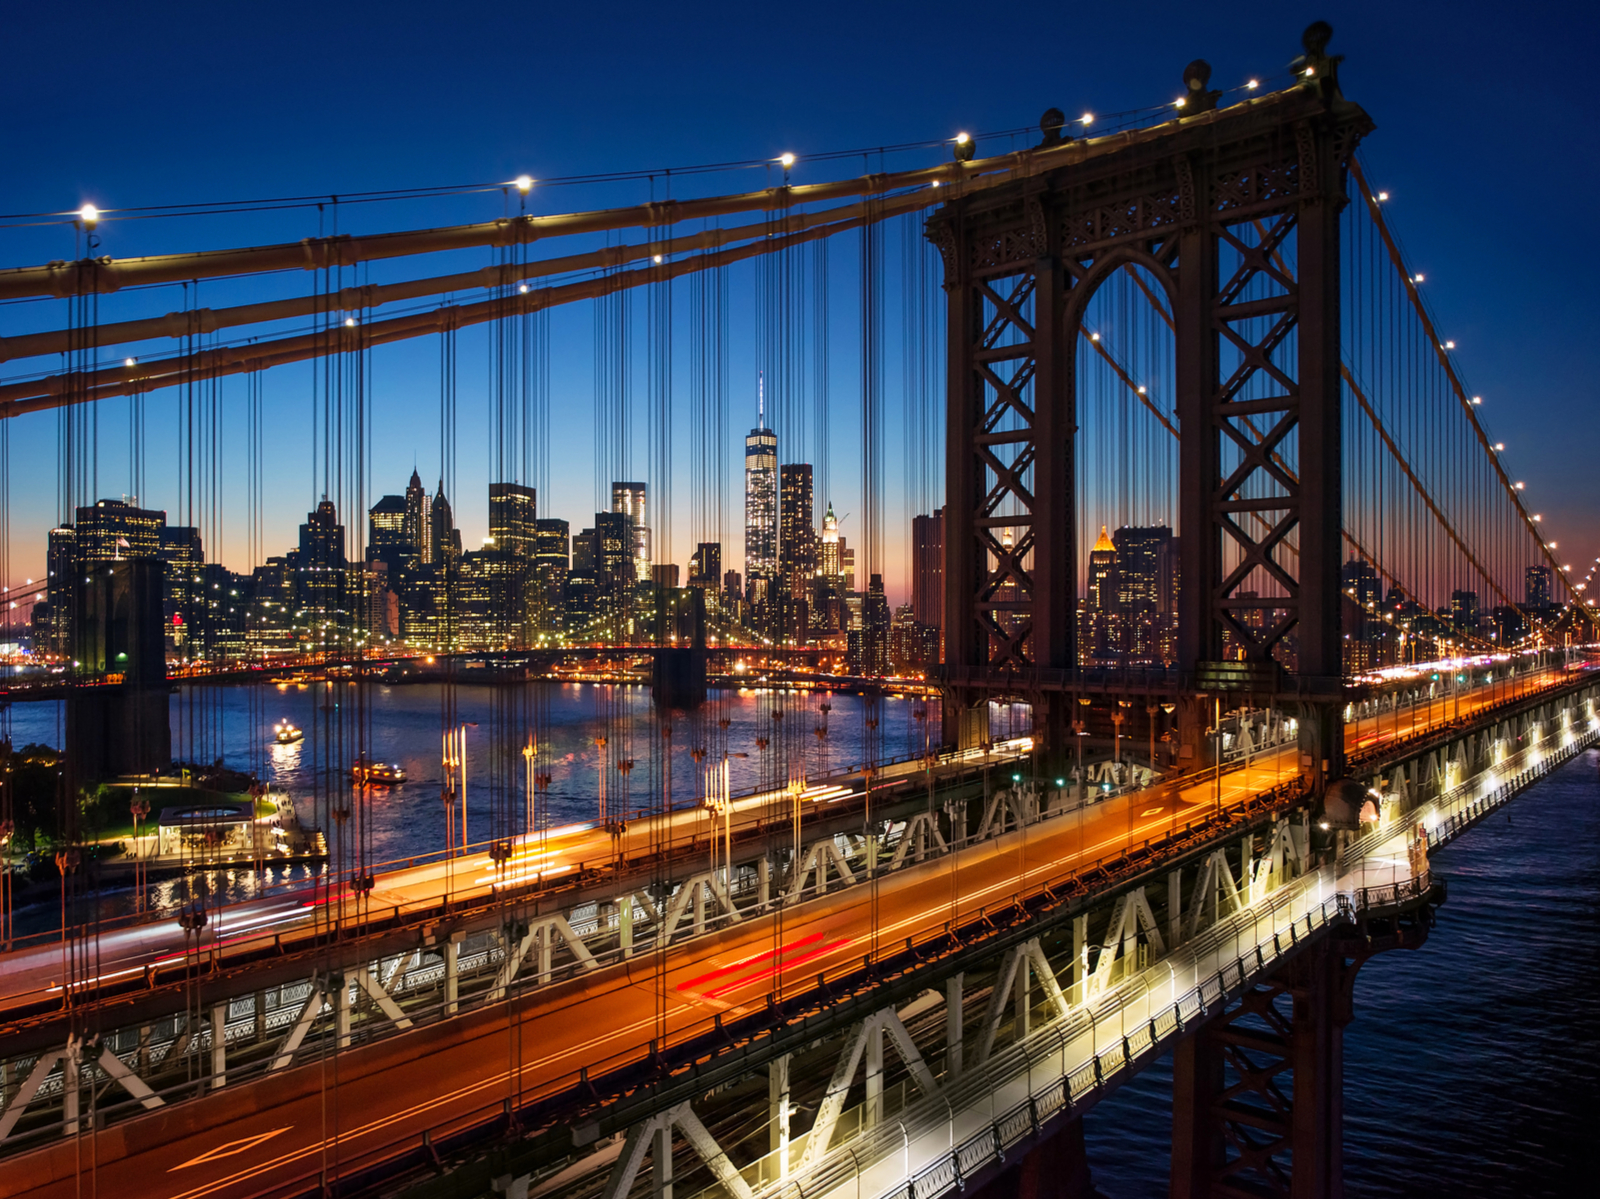 Beautiful night shot of the Brooklyn Bridge pictured during the best time to visit New York City